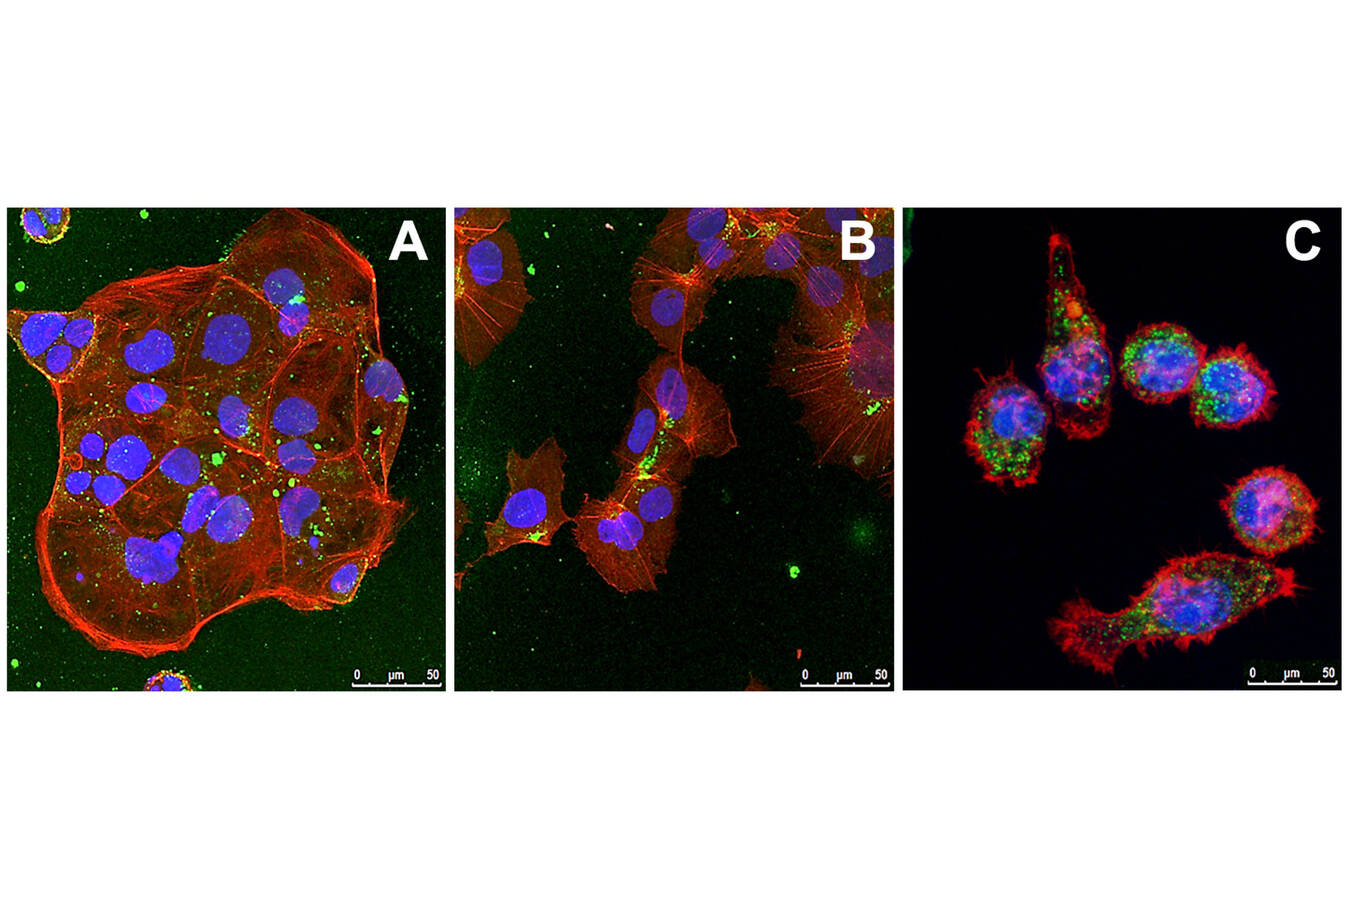 Figure 3: The uptake of particles in (A) Caco2, (B) HepG2 and (C) J774A.1 macrophages cells observed using confocal microscopy; green dots = particles, blue = nuclei, red = actin filaments (Copyright: Sphera)